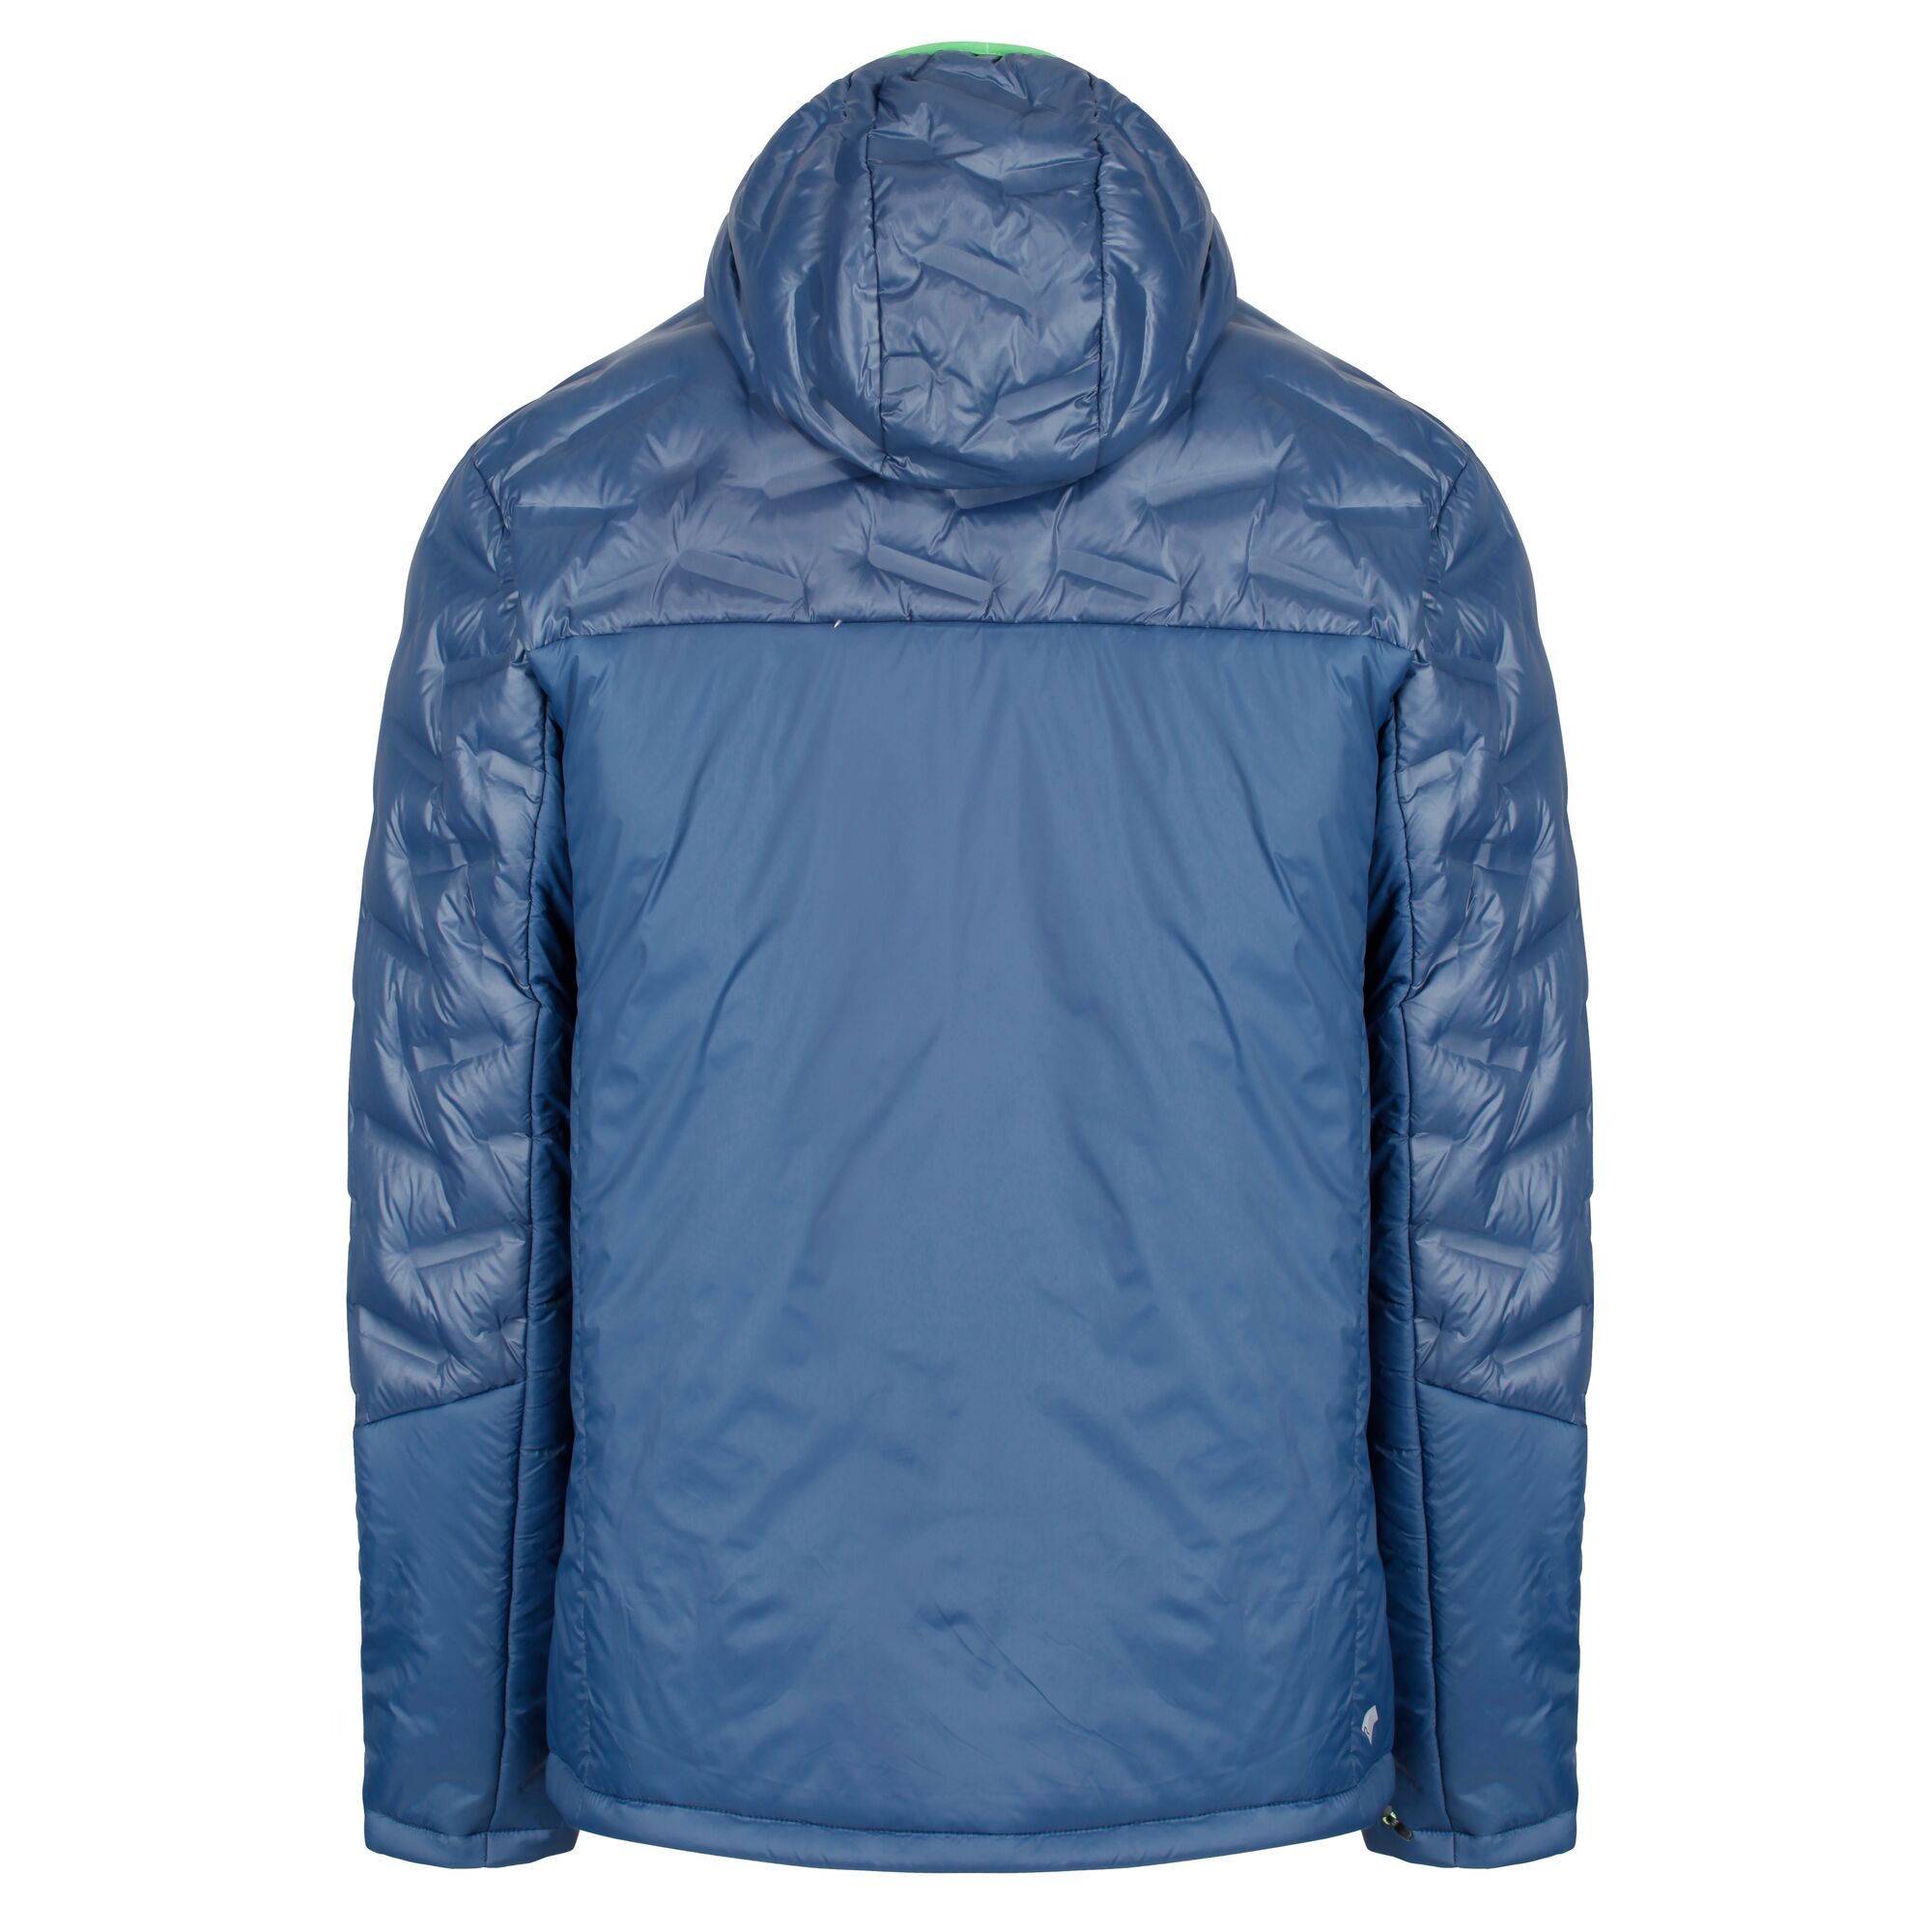 100% Polyamide. Lightweight down fill insulation. Warmloft soft-touch insulation. DWR water resistant finish. Attached hood with stretch binding. 2 zipped pockets.